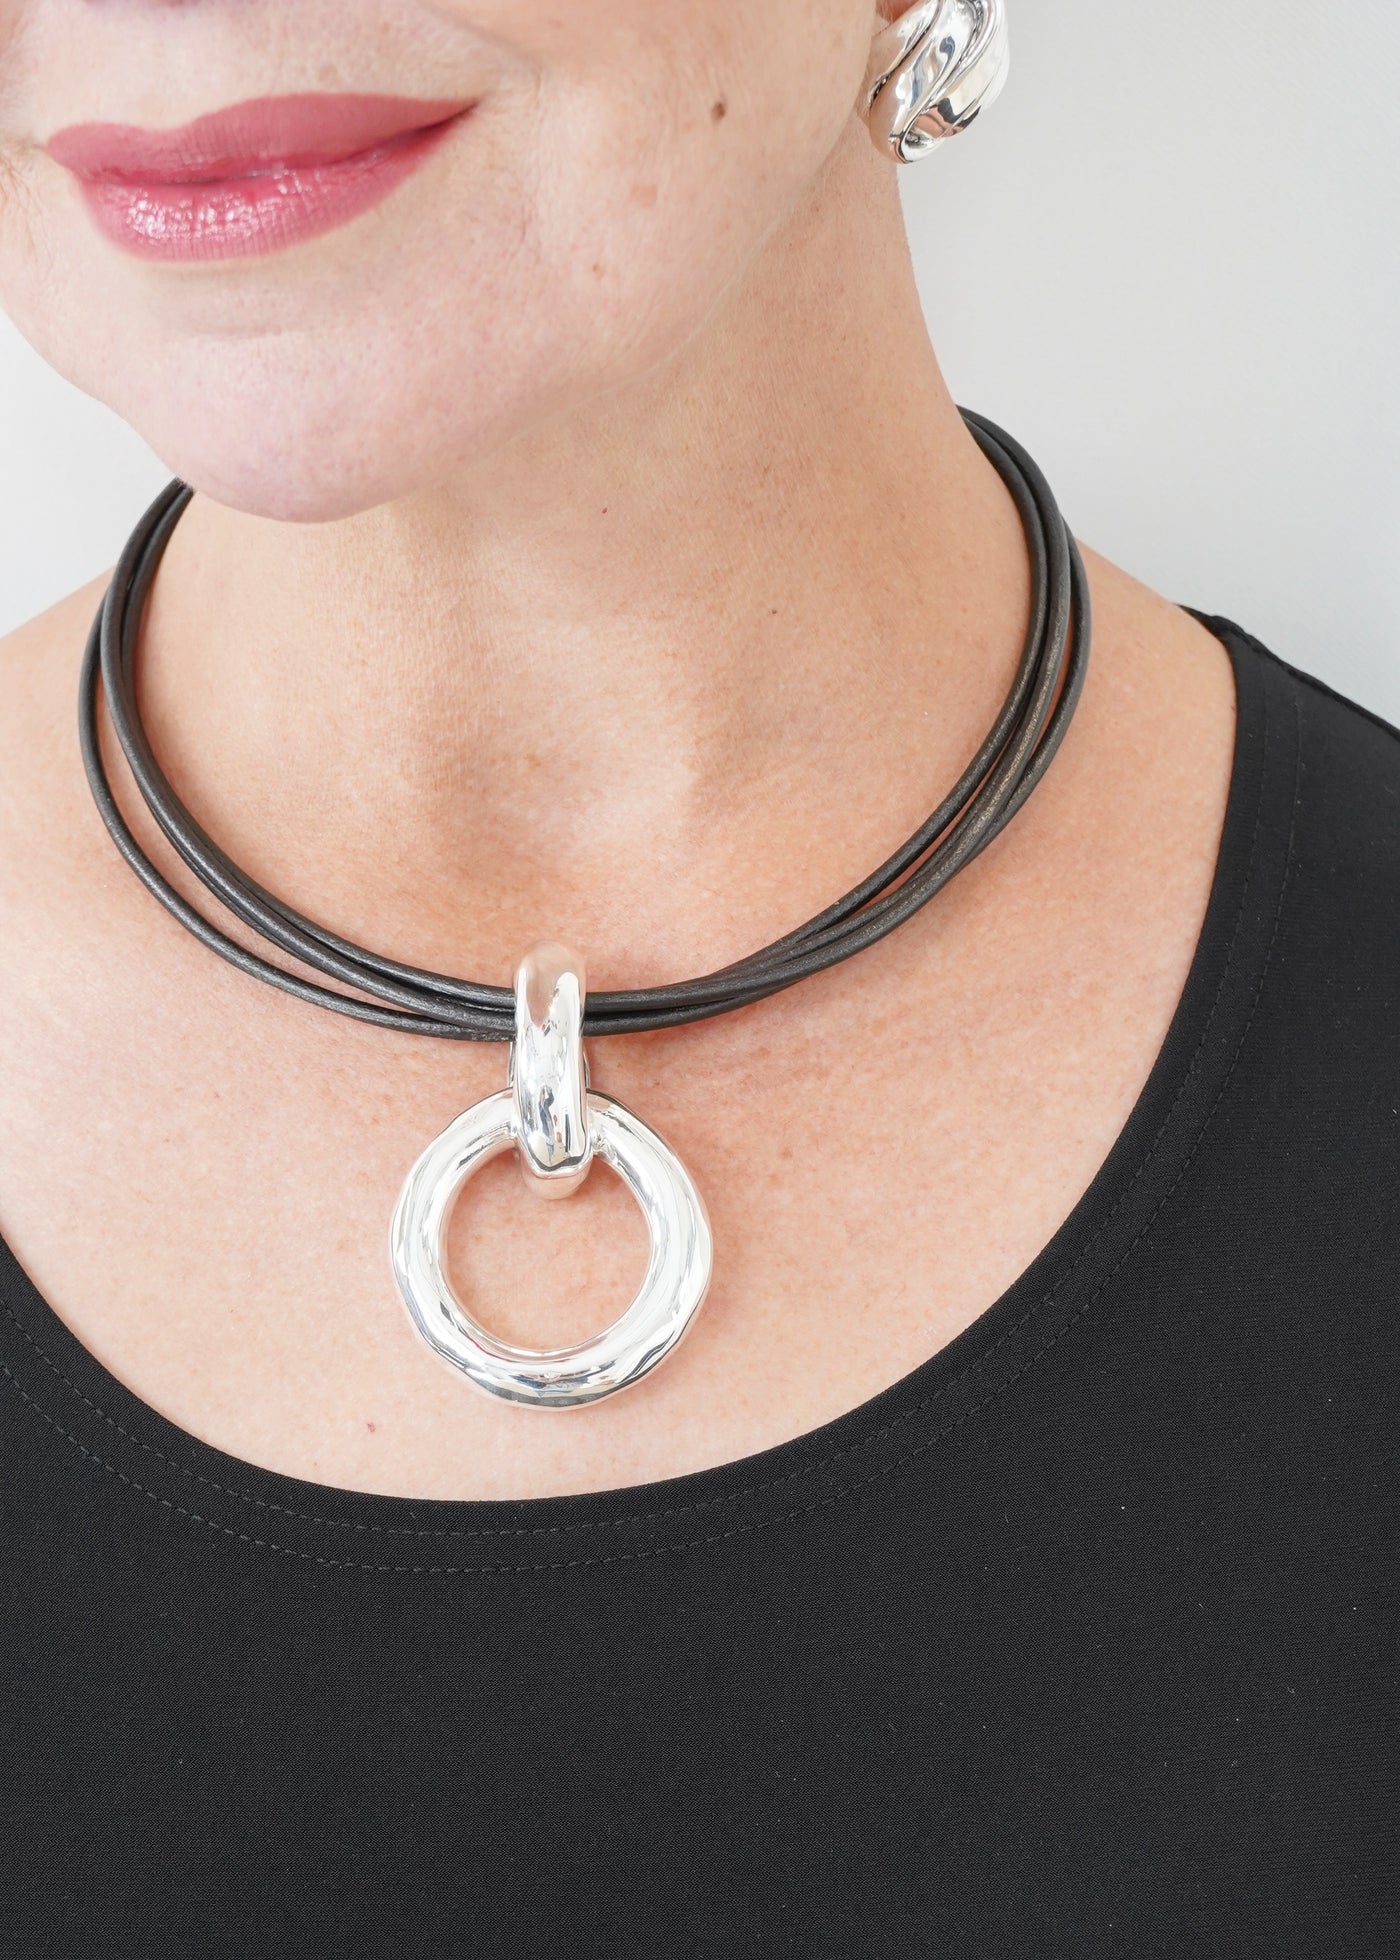 Bat Ami - Leather Cord Necklace with Circle Pendant